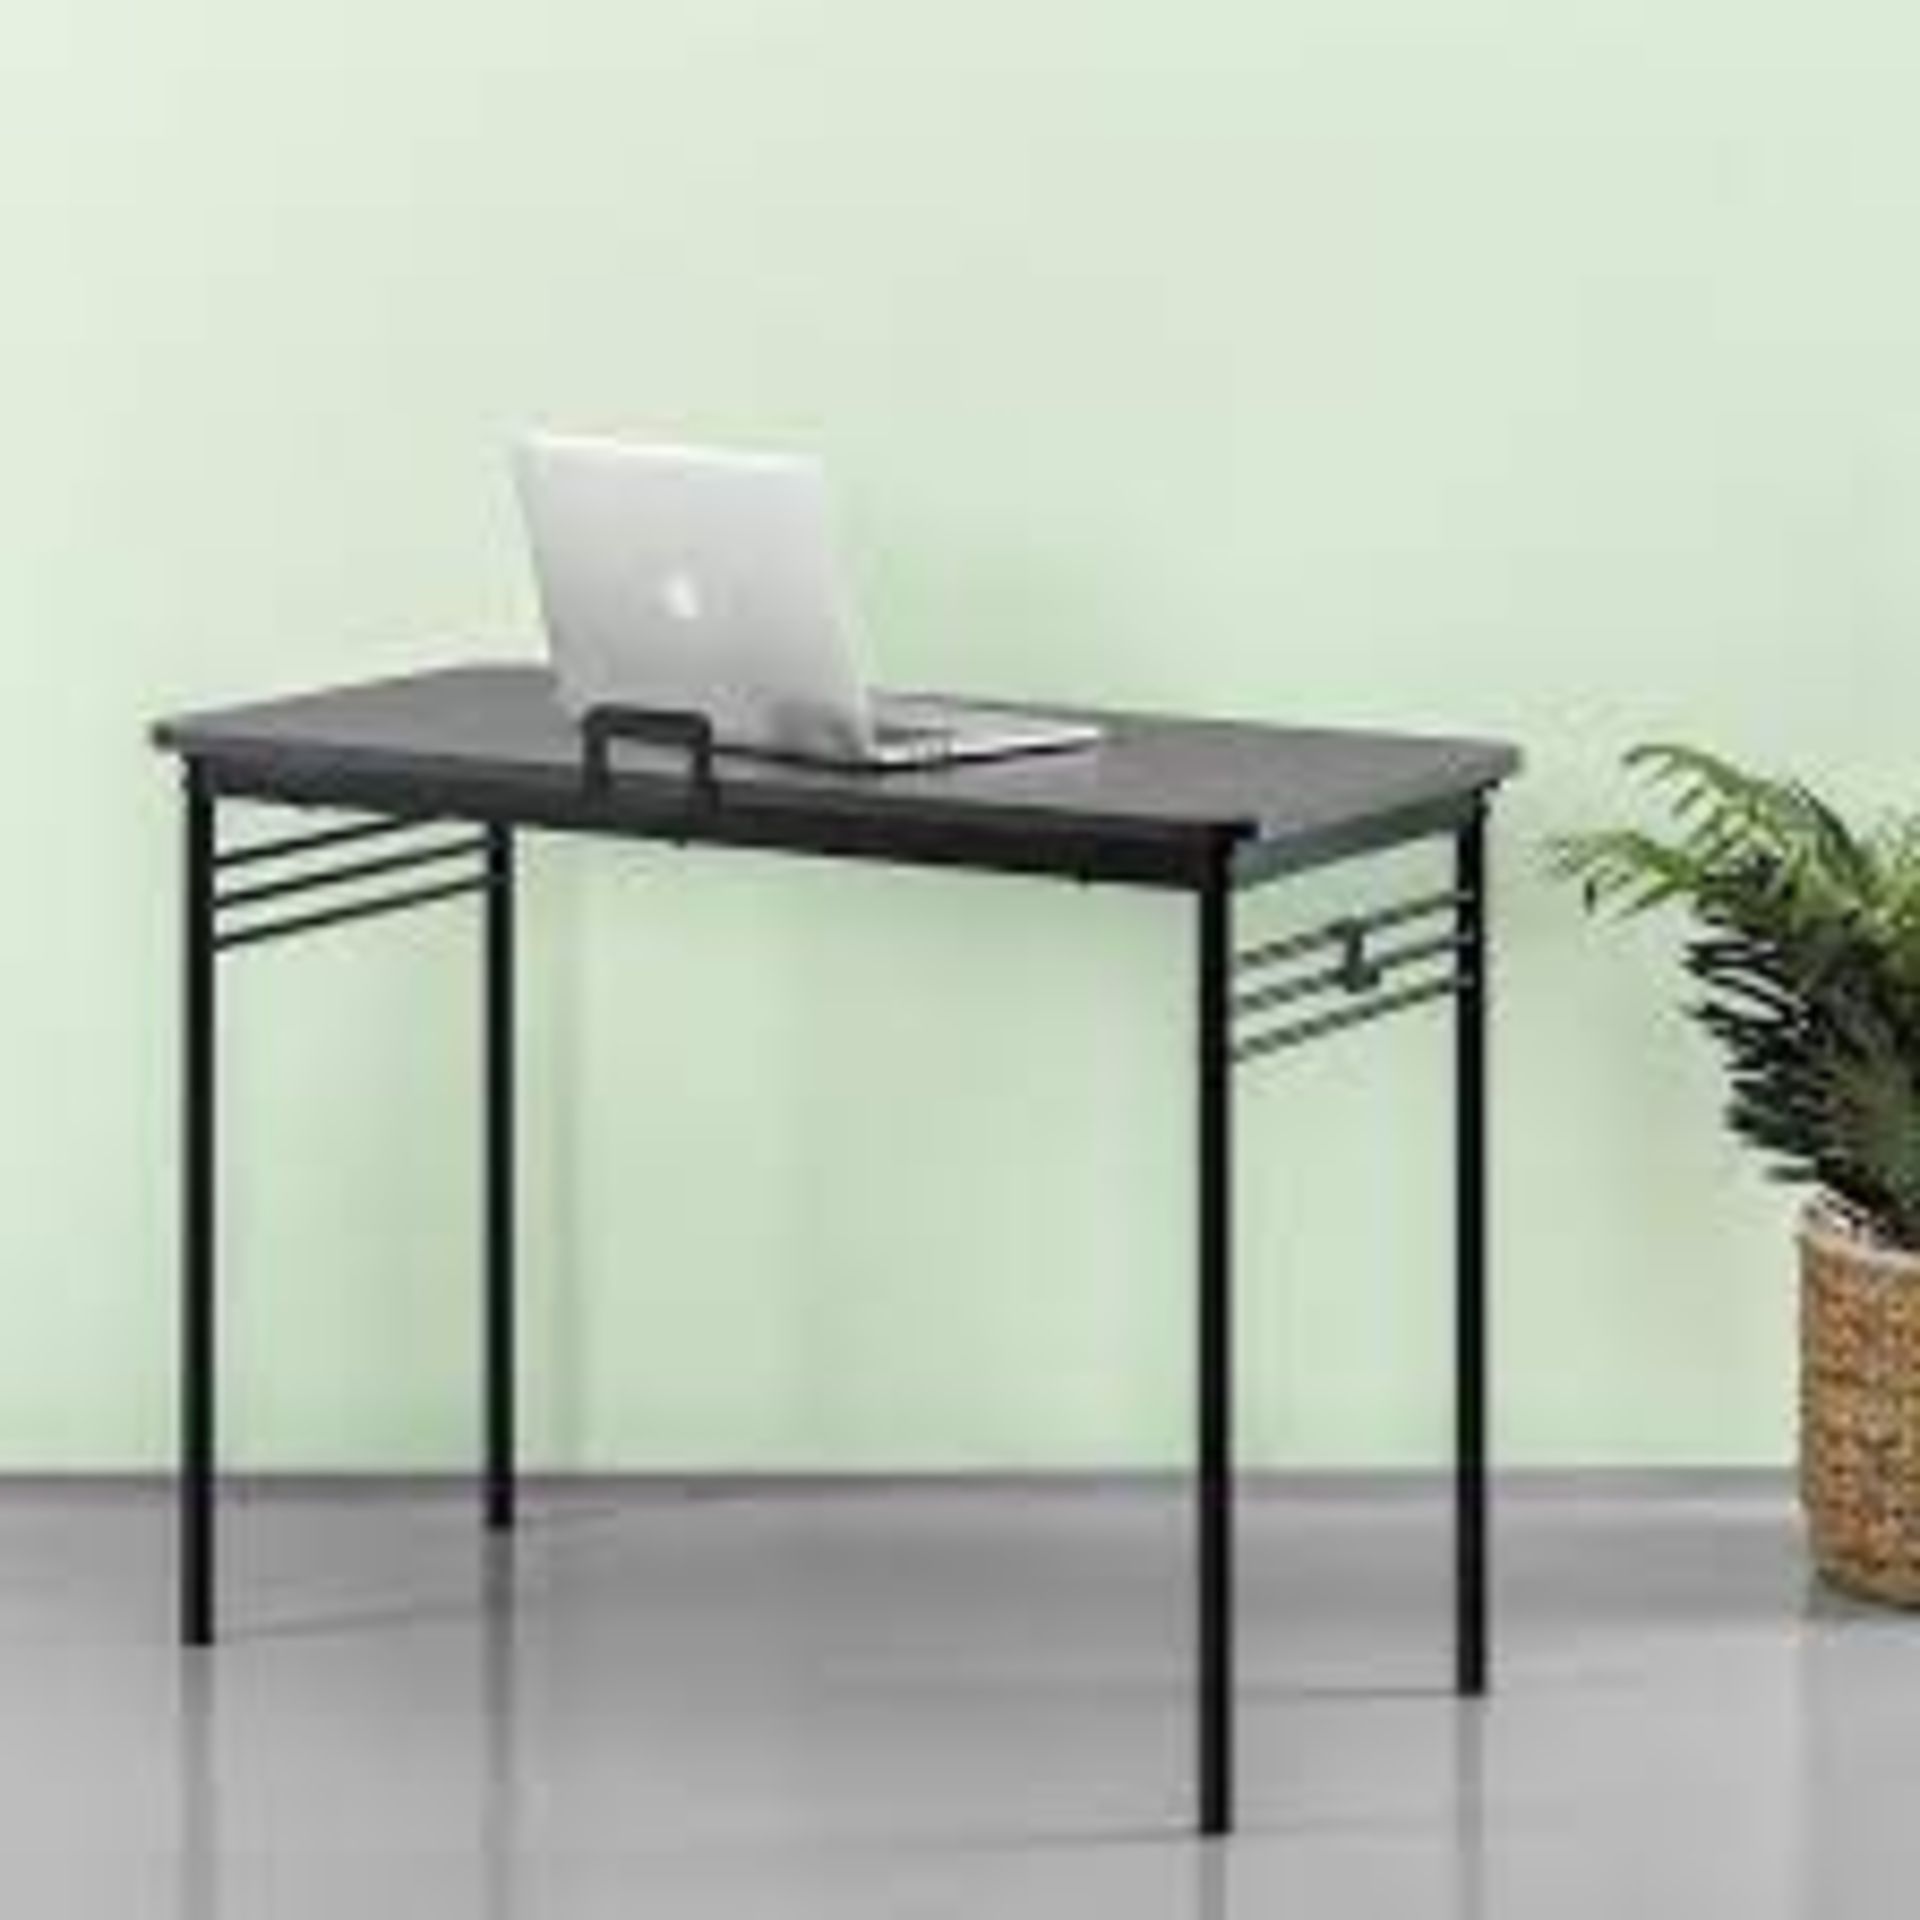 Johansson Desk. RRP £105.00. A high base and two-tone colour palette give this desk its eye-catching